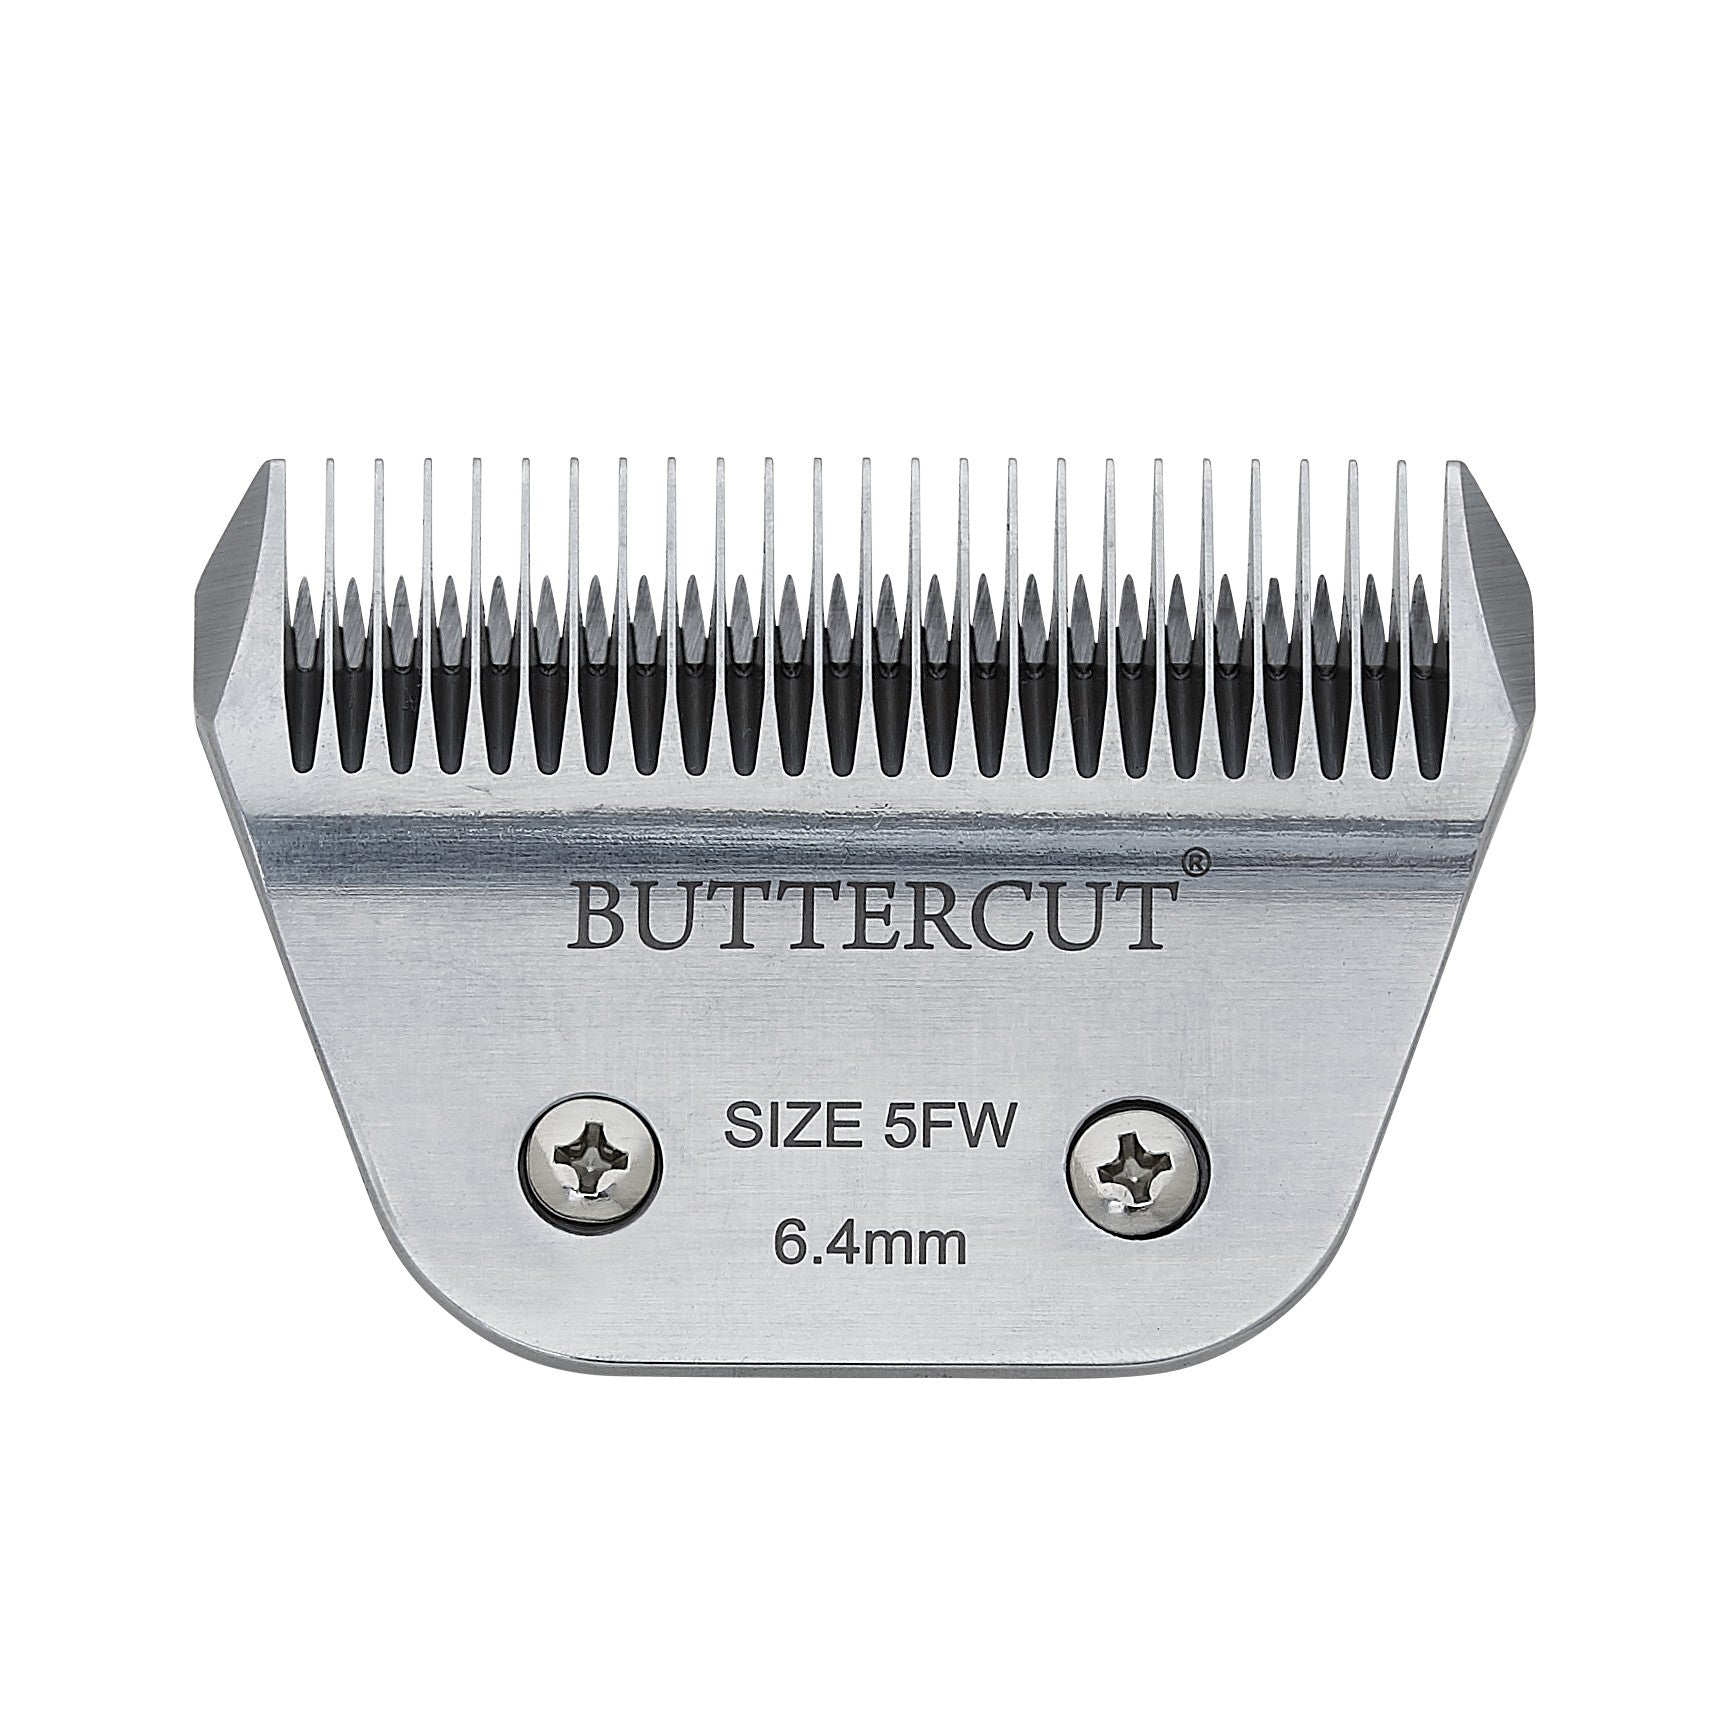 Geib Stainless Steel Buttercut Clipper Blades Fits A5 Style Clippers 5FW